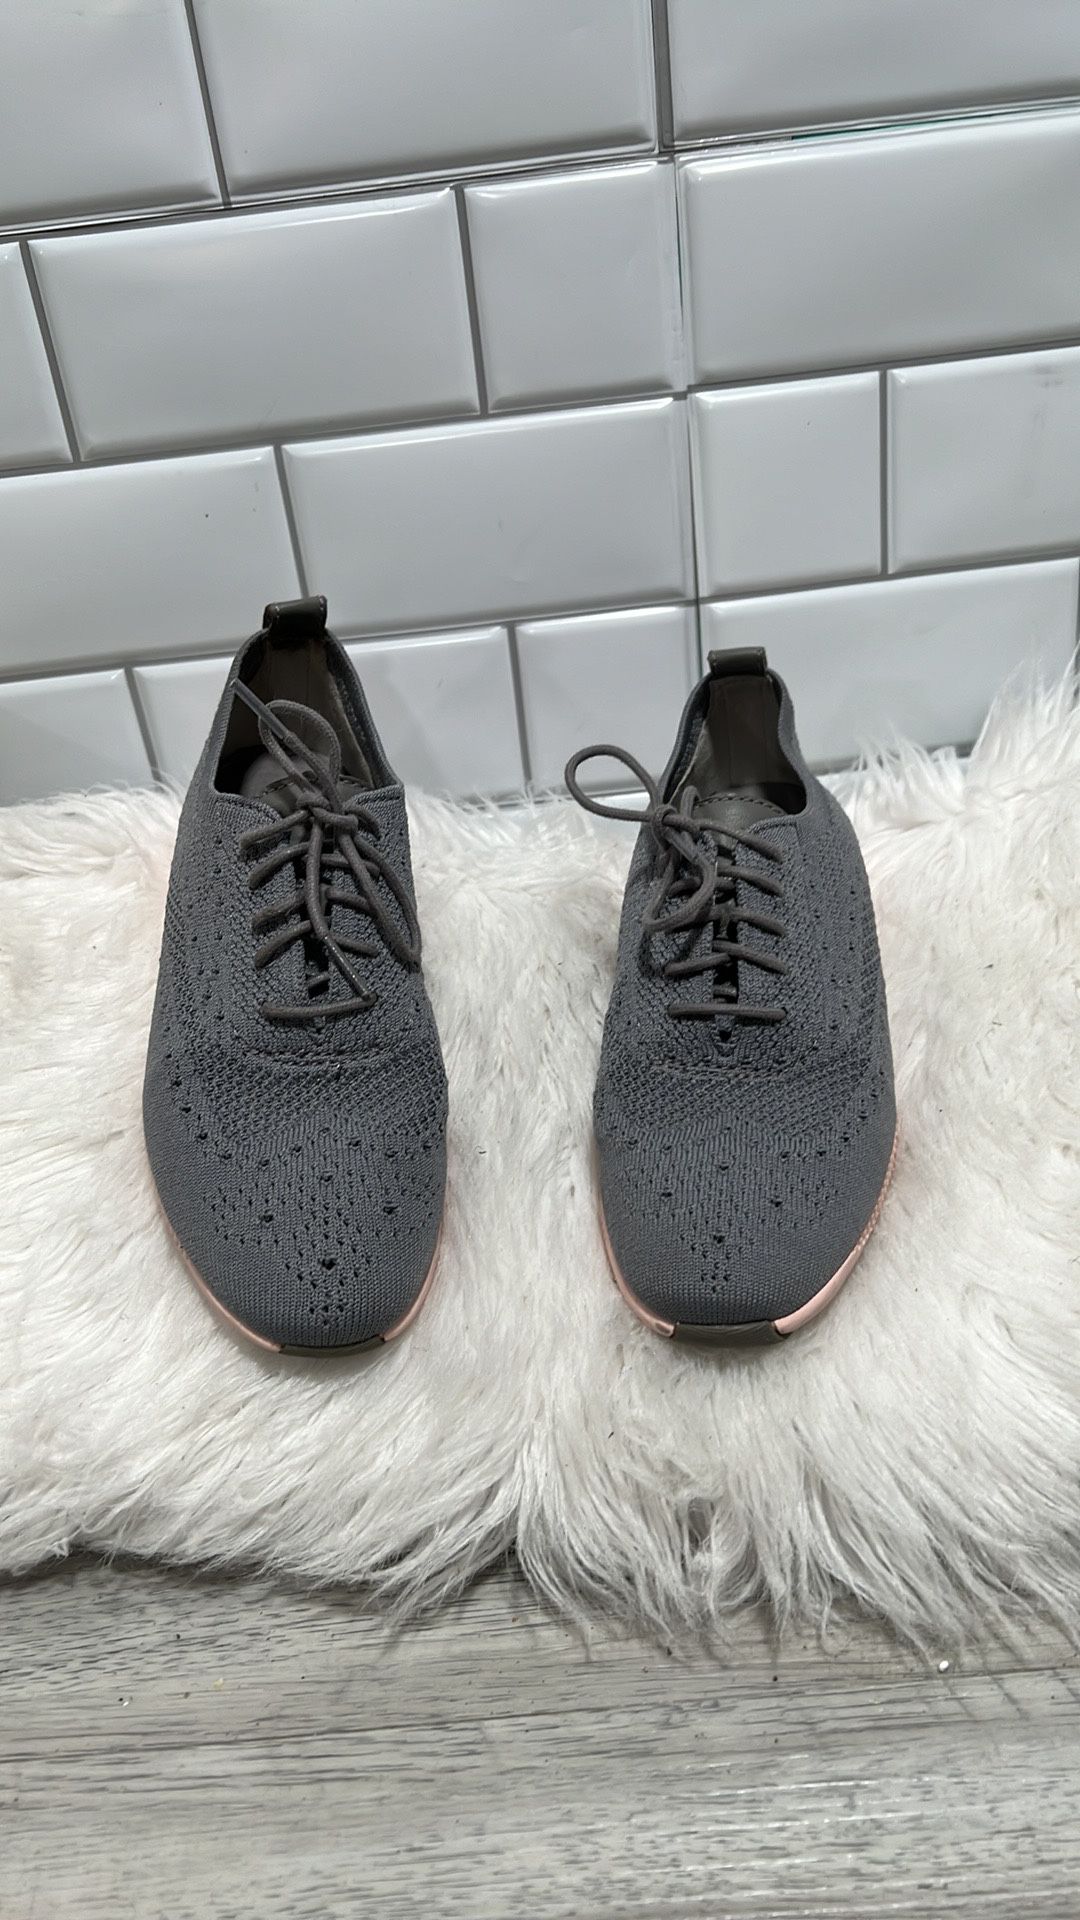 Cole Haan 2. Zero Grand.OS  gray/pink lightweight perforated fabric oxfords 6 B